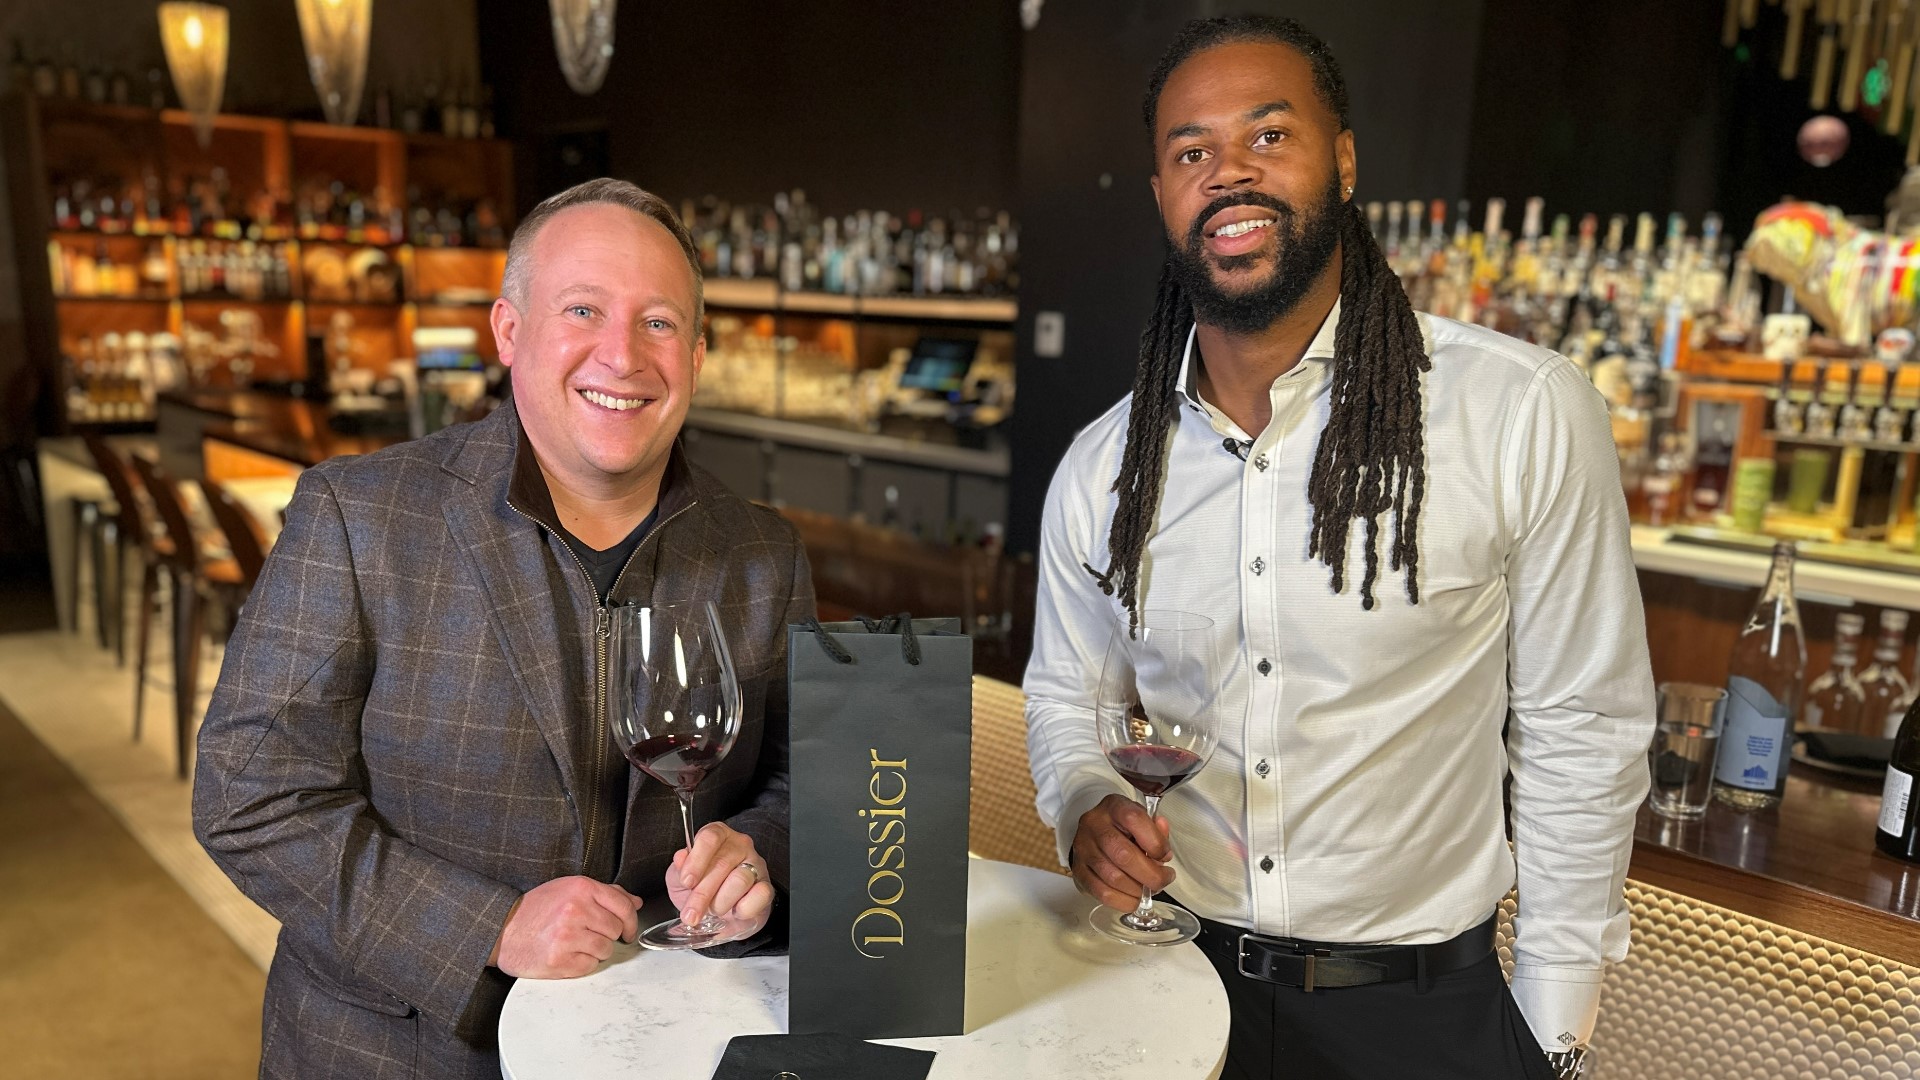 Sidney Rice and business partner Tim Lenihan founded Dossier Wine, made in Walla Walla. #k5evening